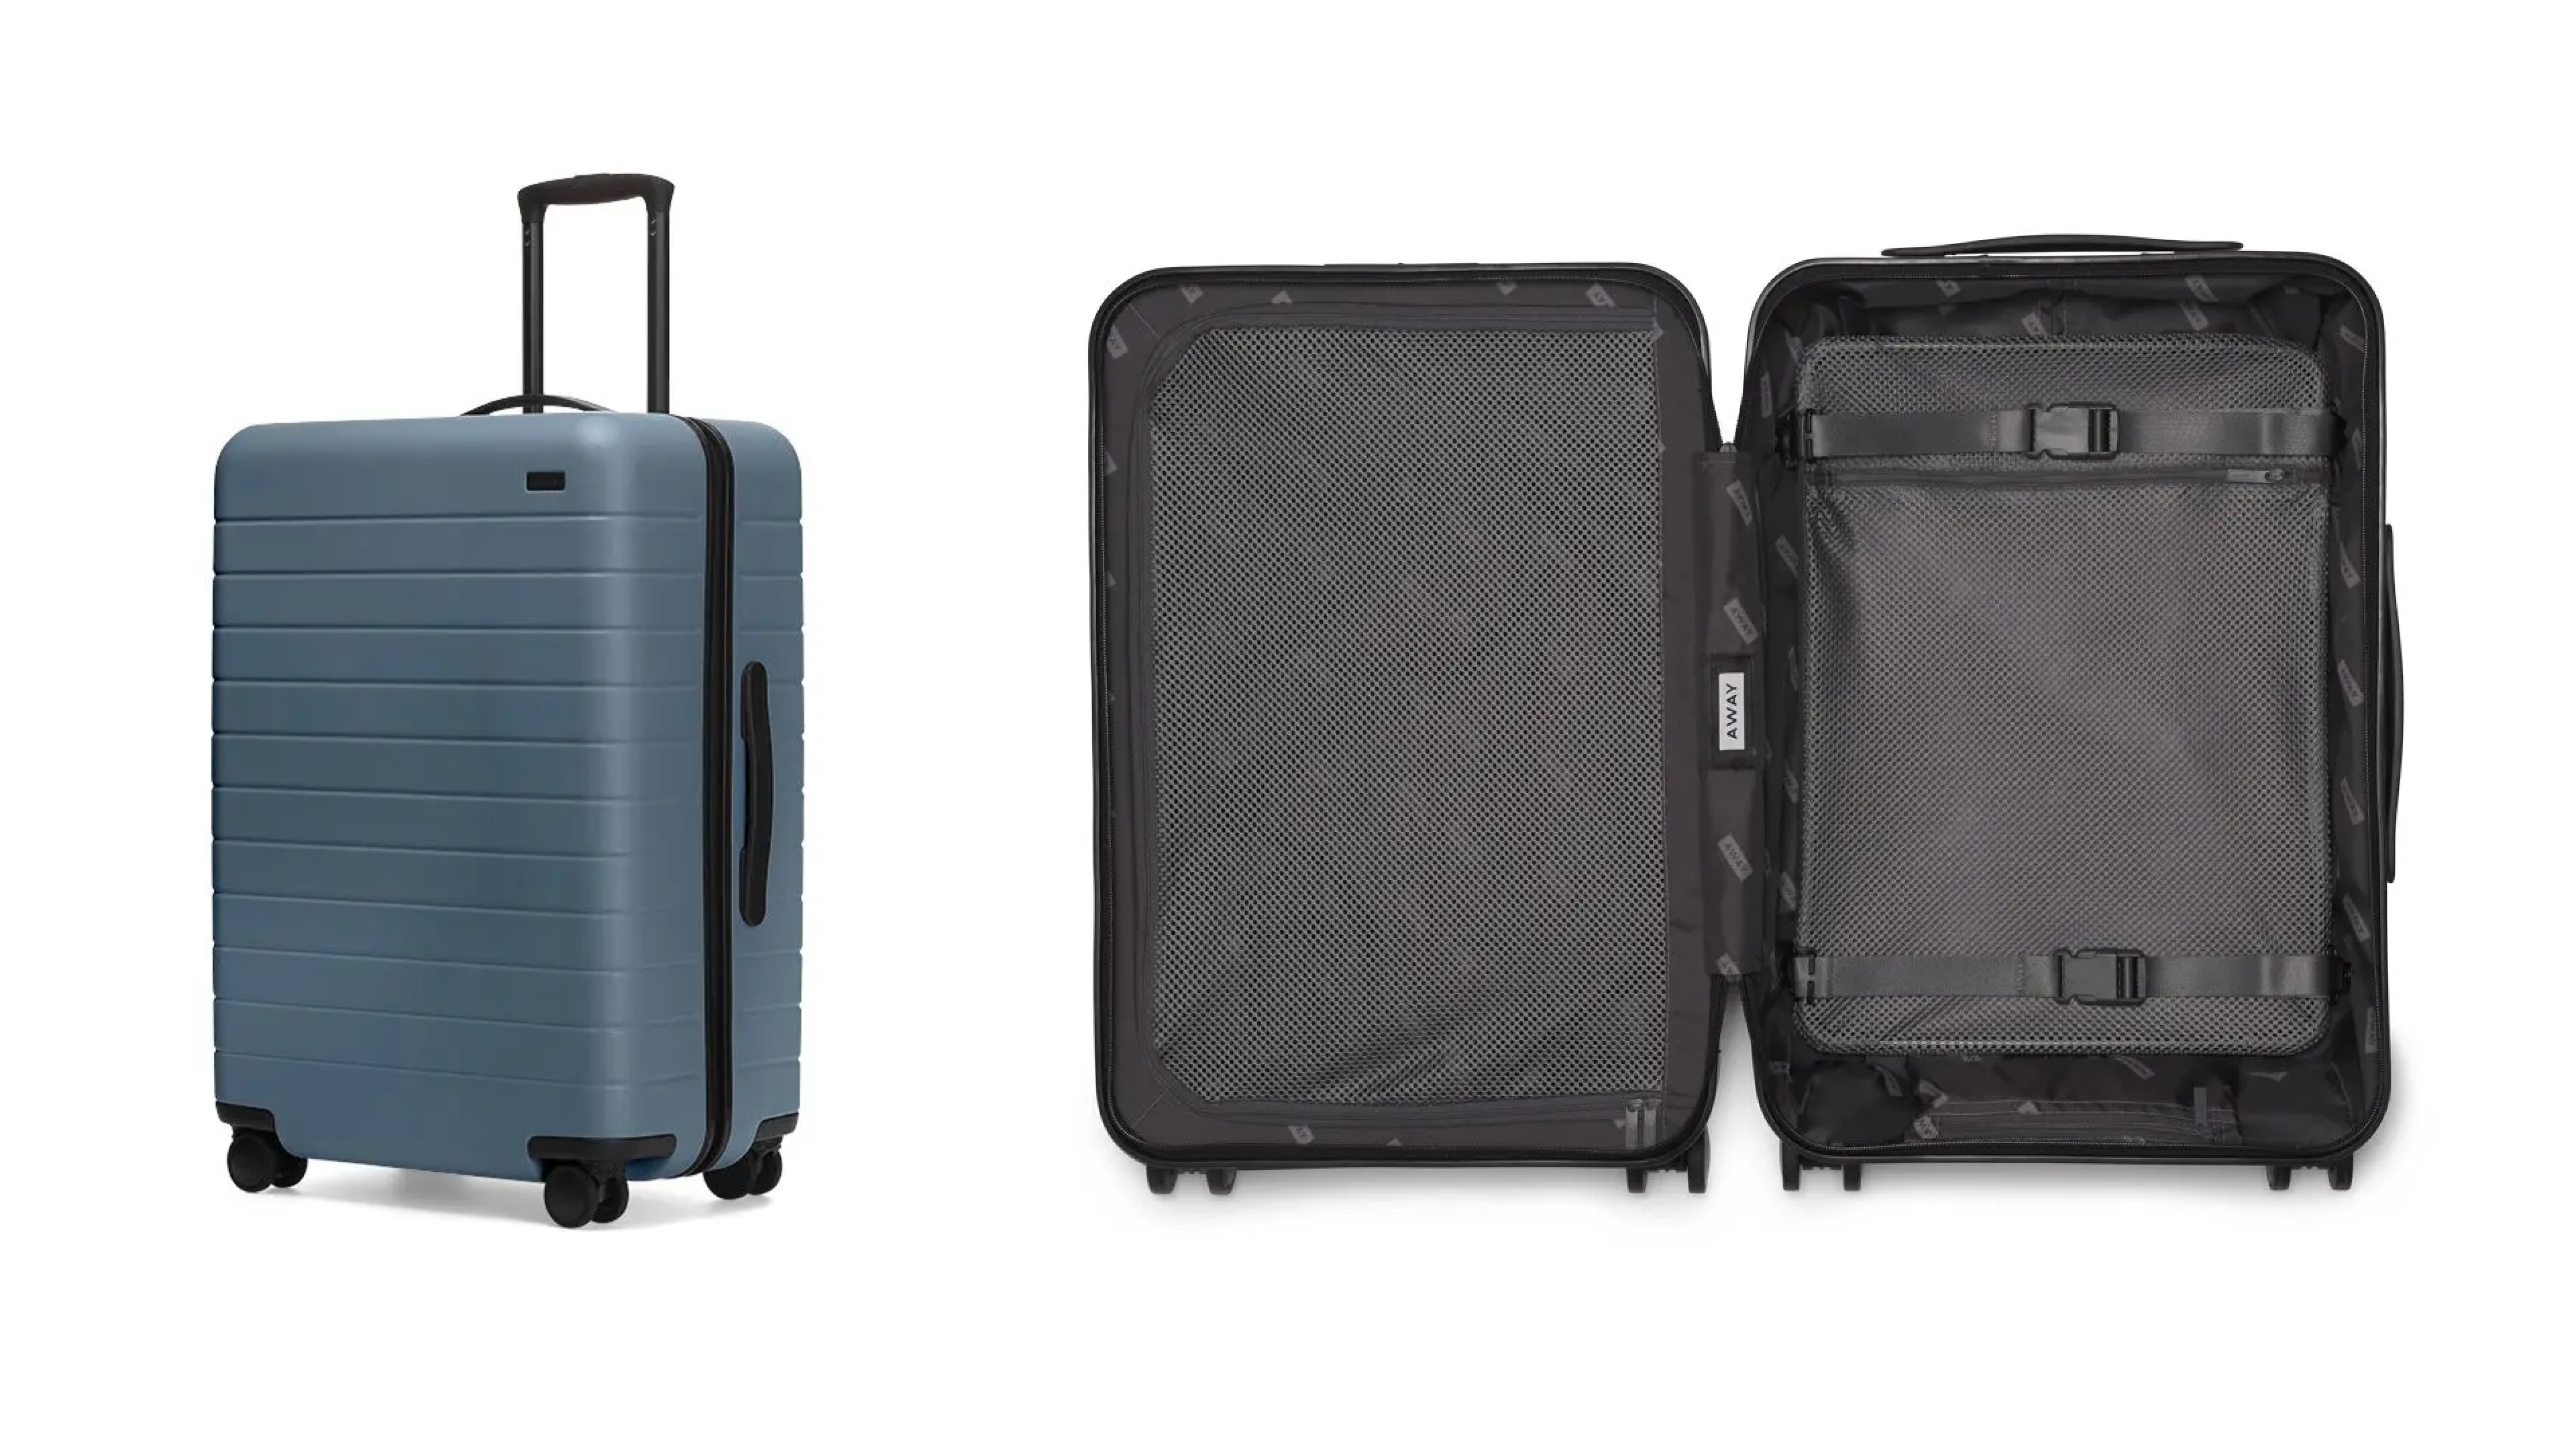 durable suitcase with a hard outer shell, inner laundry bag, and four wheels